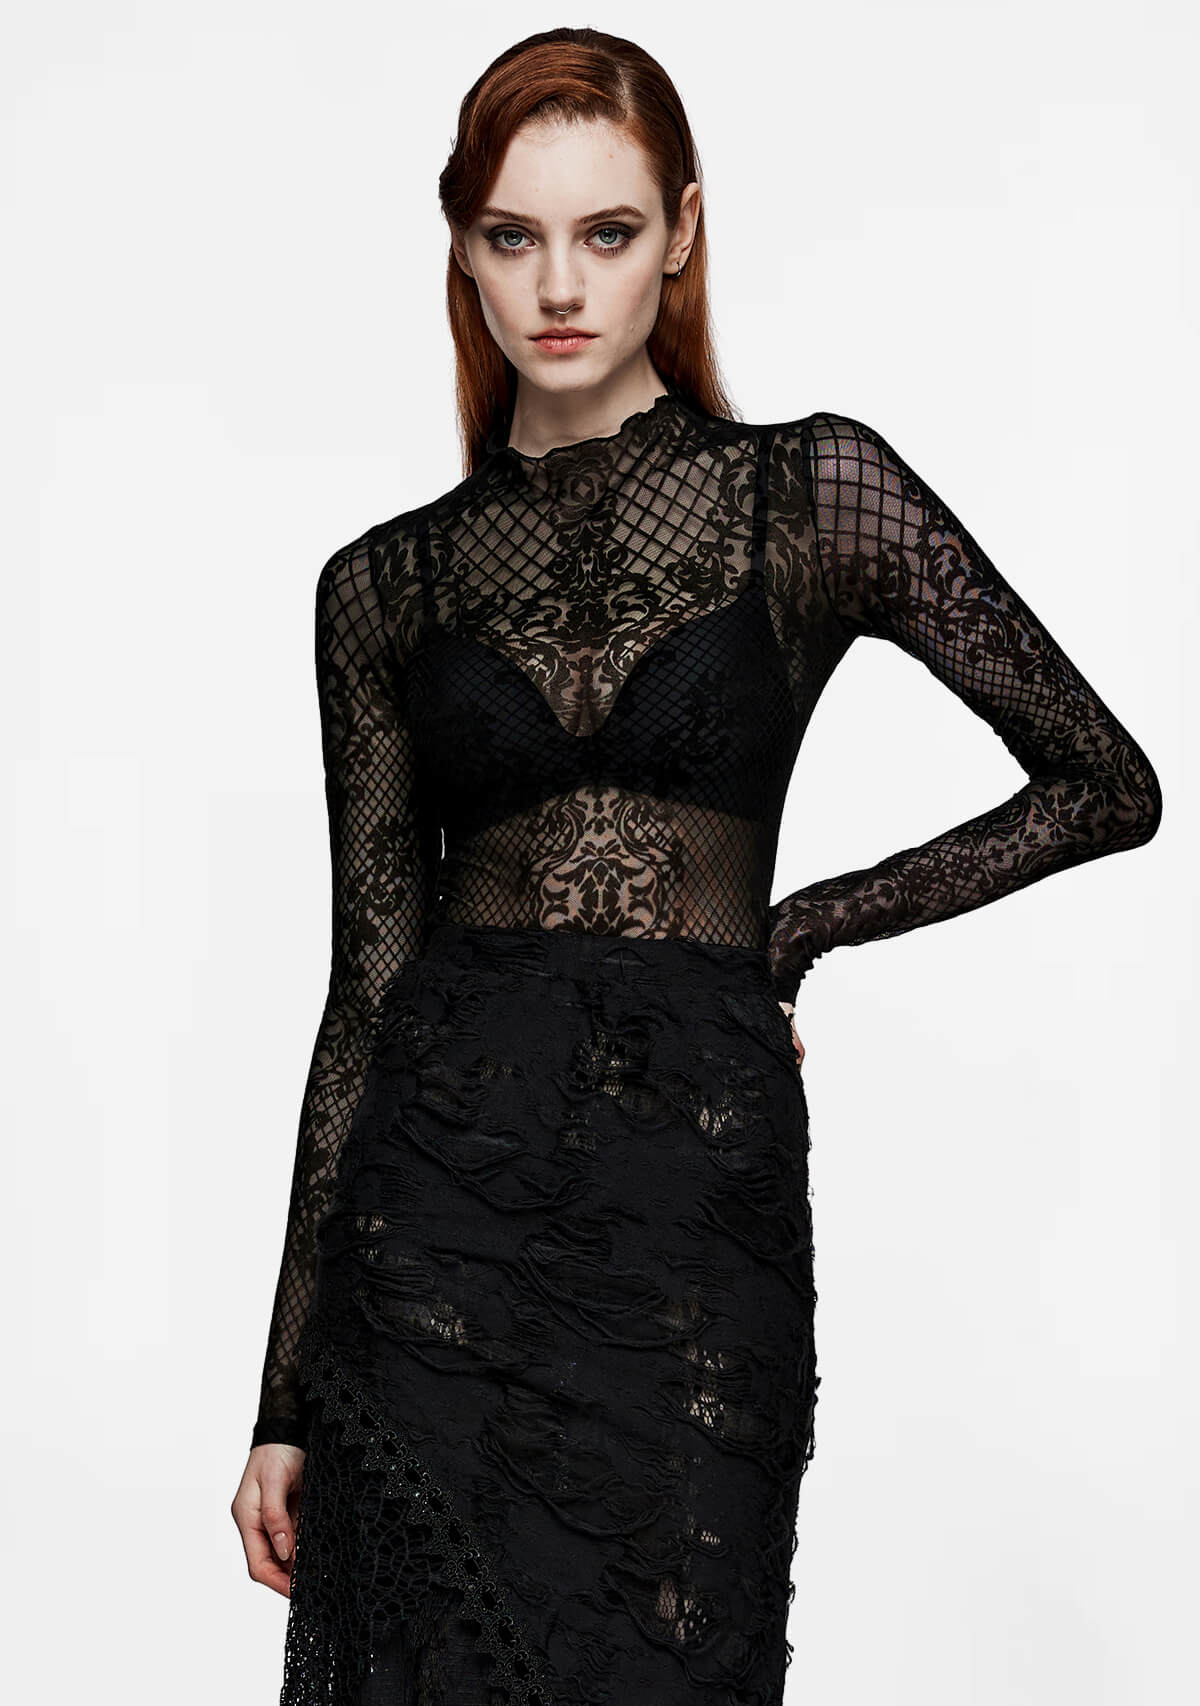 Gothic High-Neck Sheer Lace Long Sleeve Top